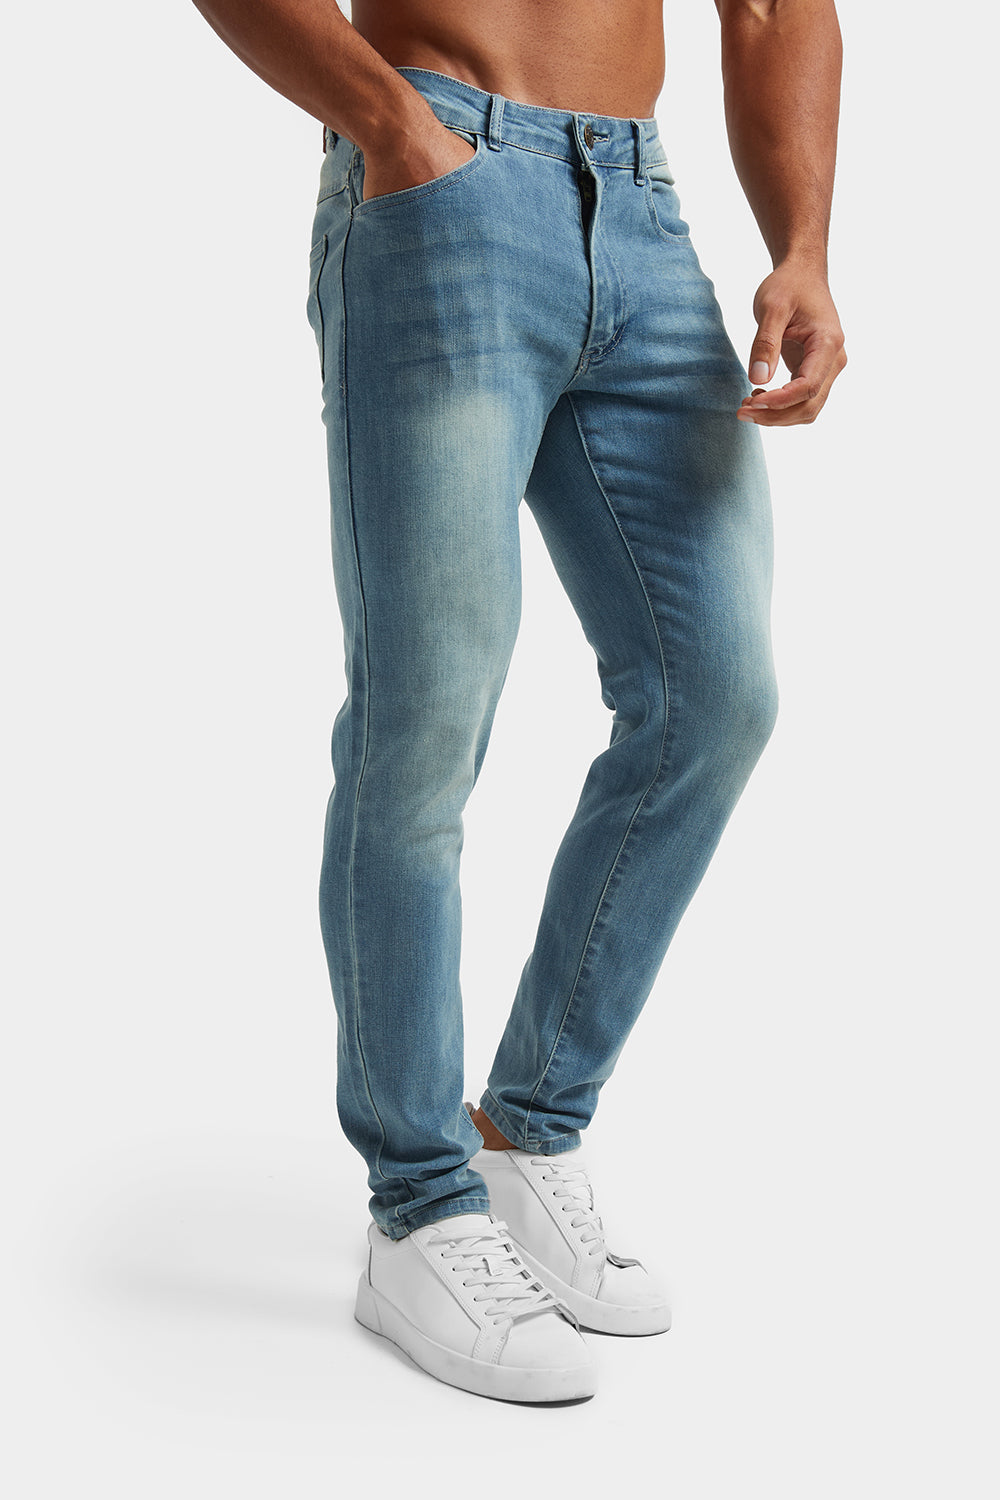 High Waisted Jeans in Dark Blue - TAILORED ATHLETE - USA